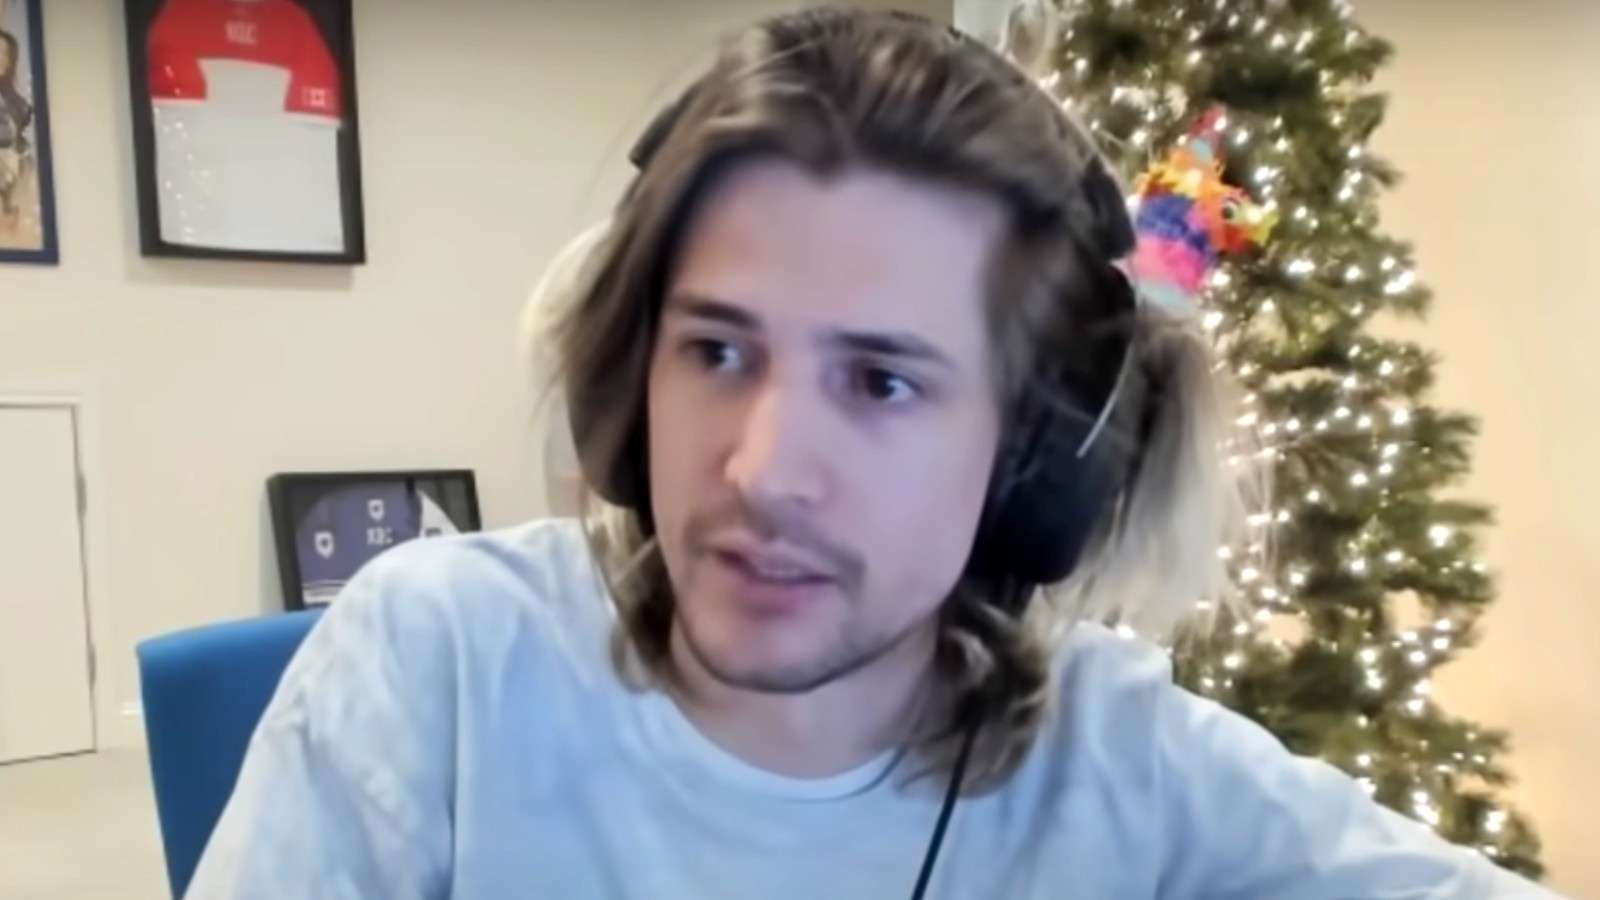 xQc in a YouTube video